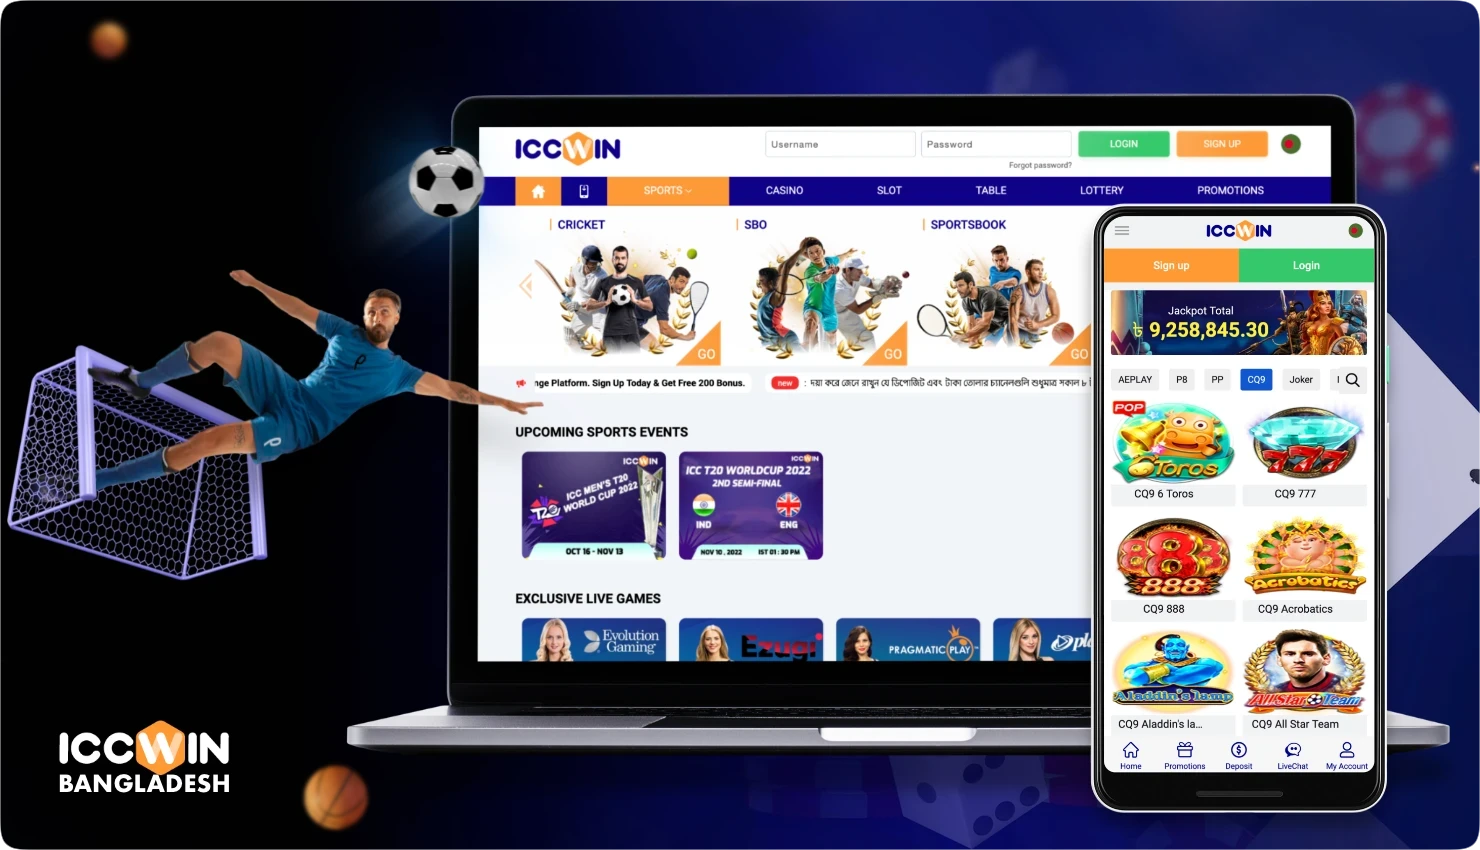 Detailed information about official Iccwin website for legal betting on sports in Bangladesh